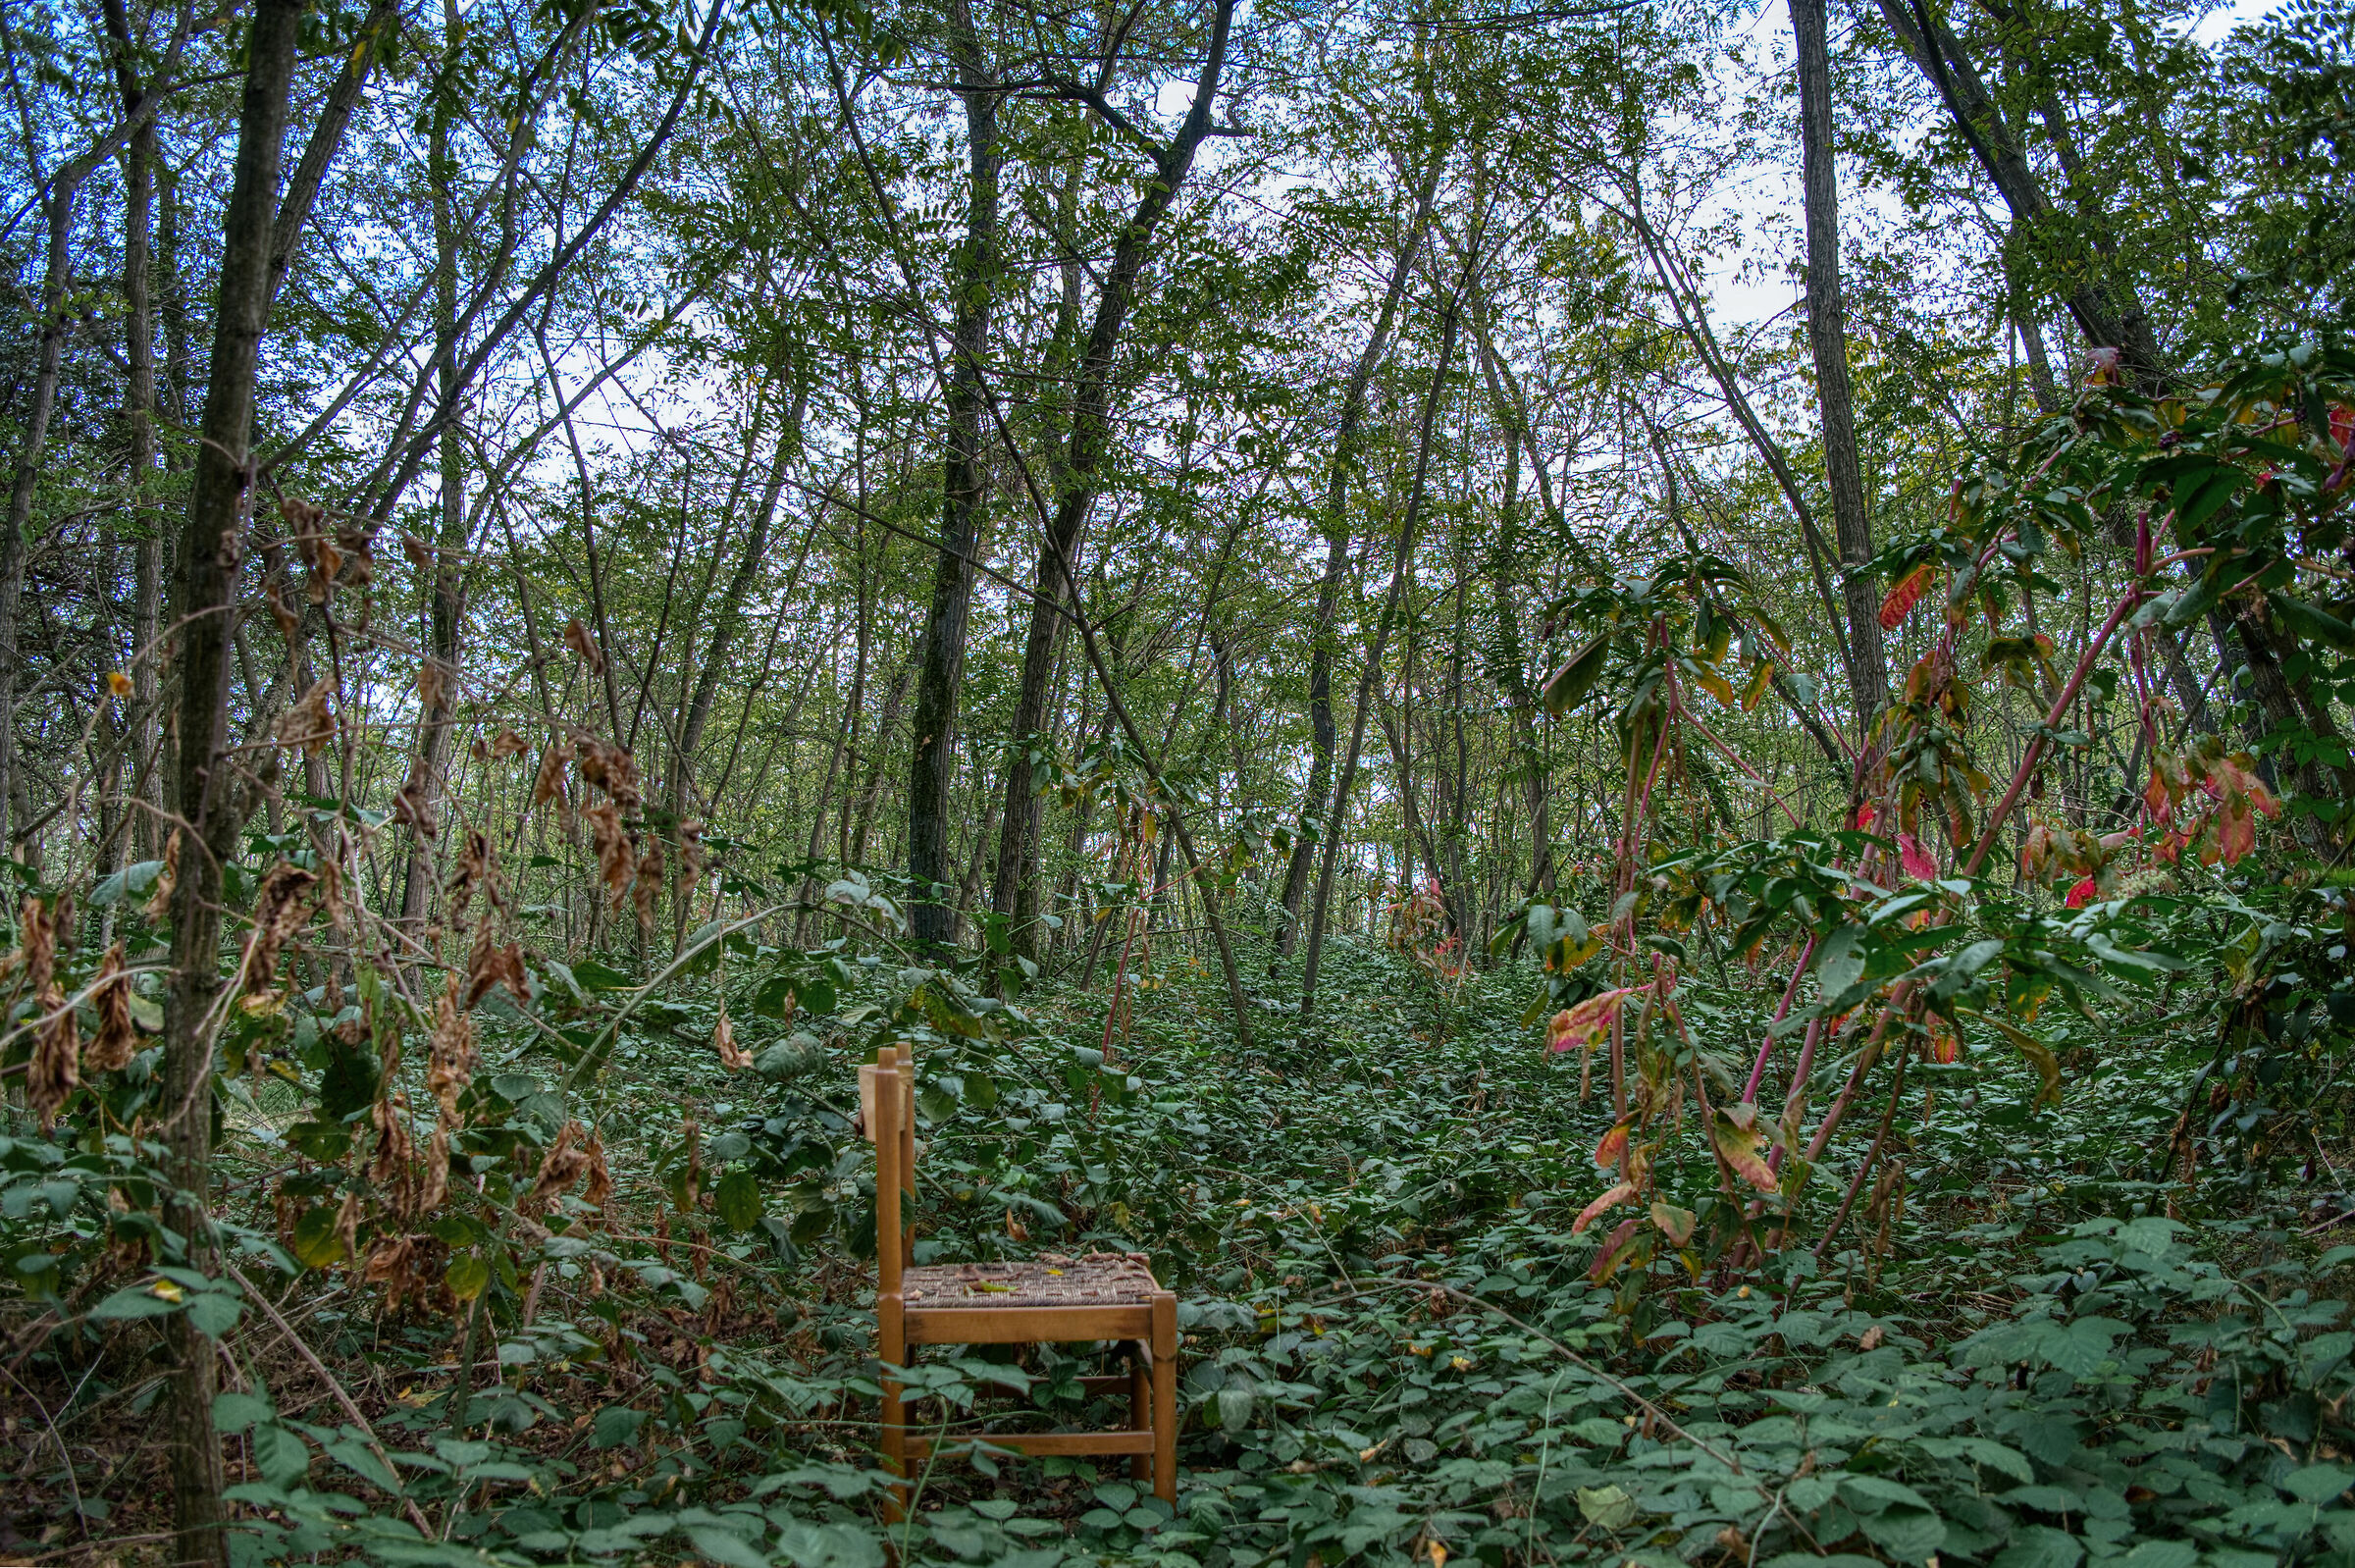 The Chair in the Woods...